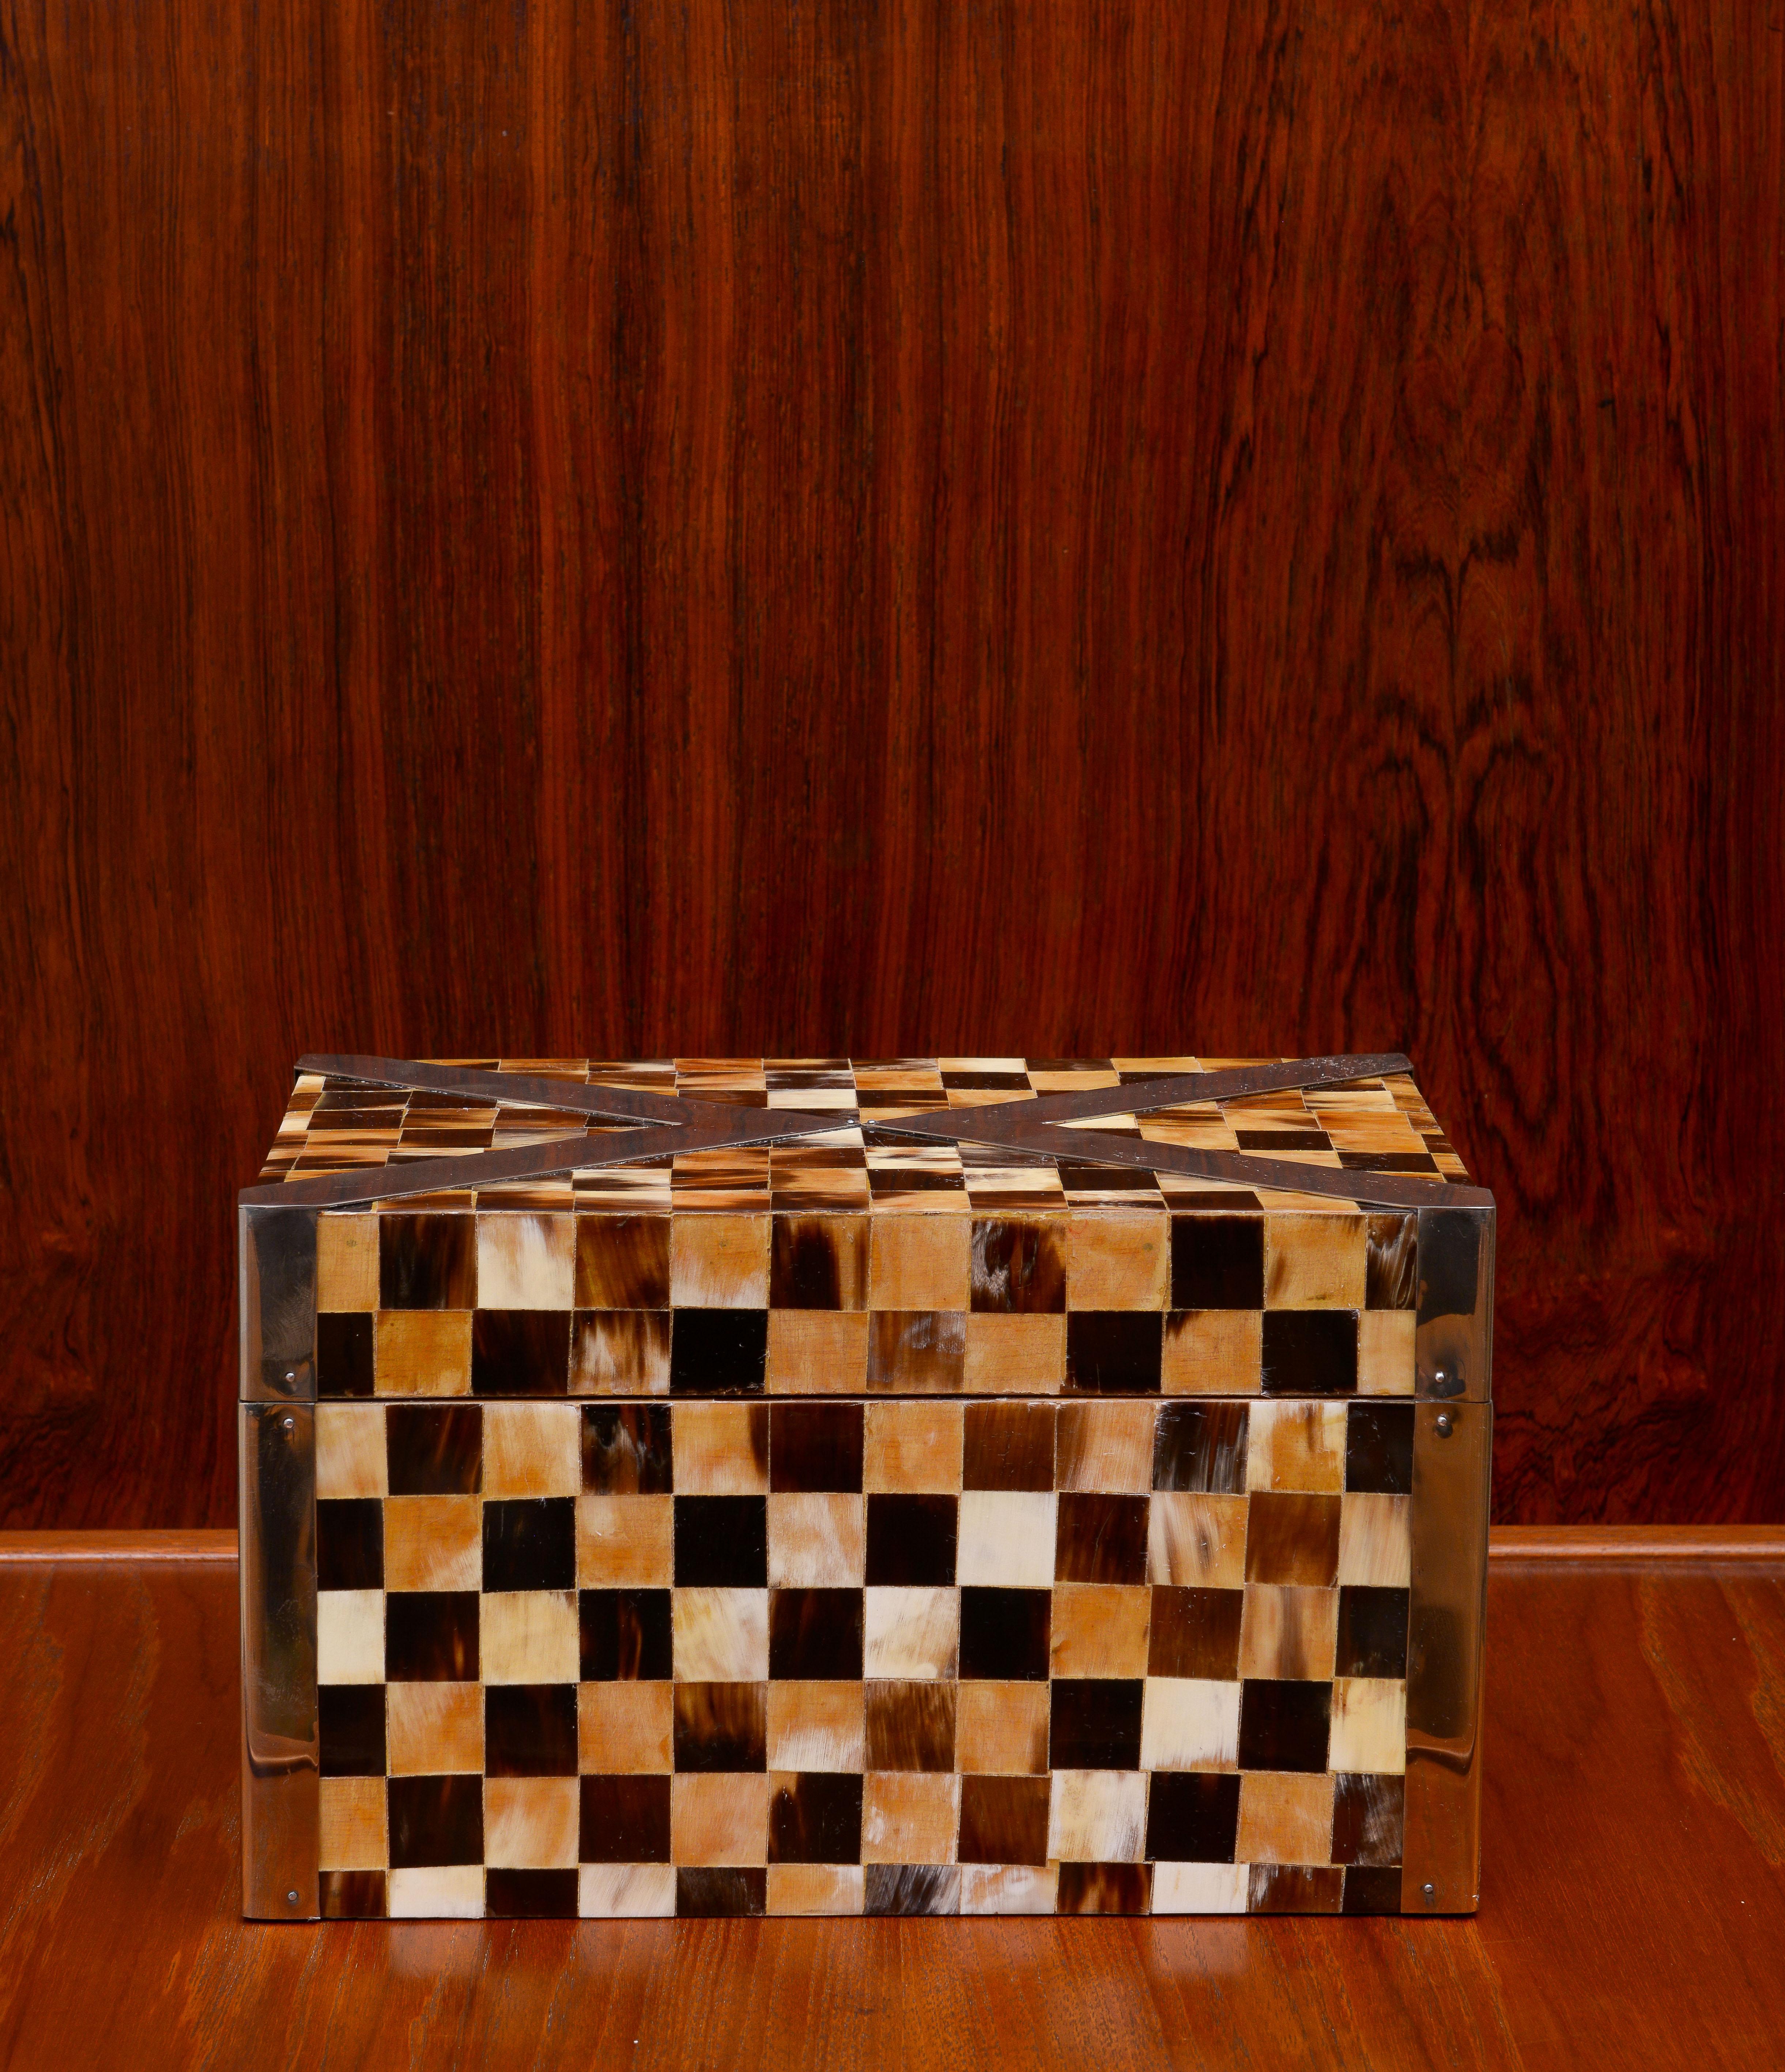 One absolutely gorgeous decorative box by Enrique Garcel 1980s. In two tone tessellated horn and brass bands surrounding it. The brass hinges make this box extremely sturdy with good weight. The box is signed made in Colombia which is where Garcel